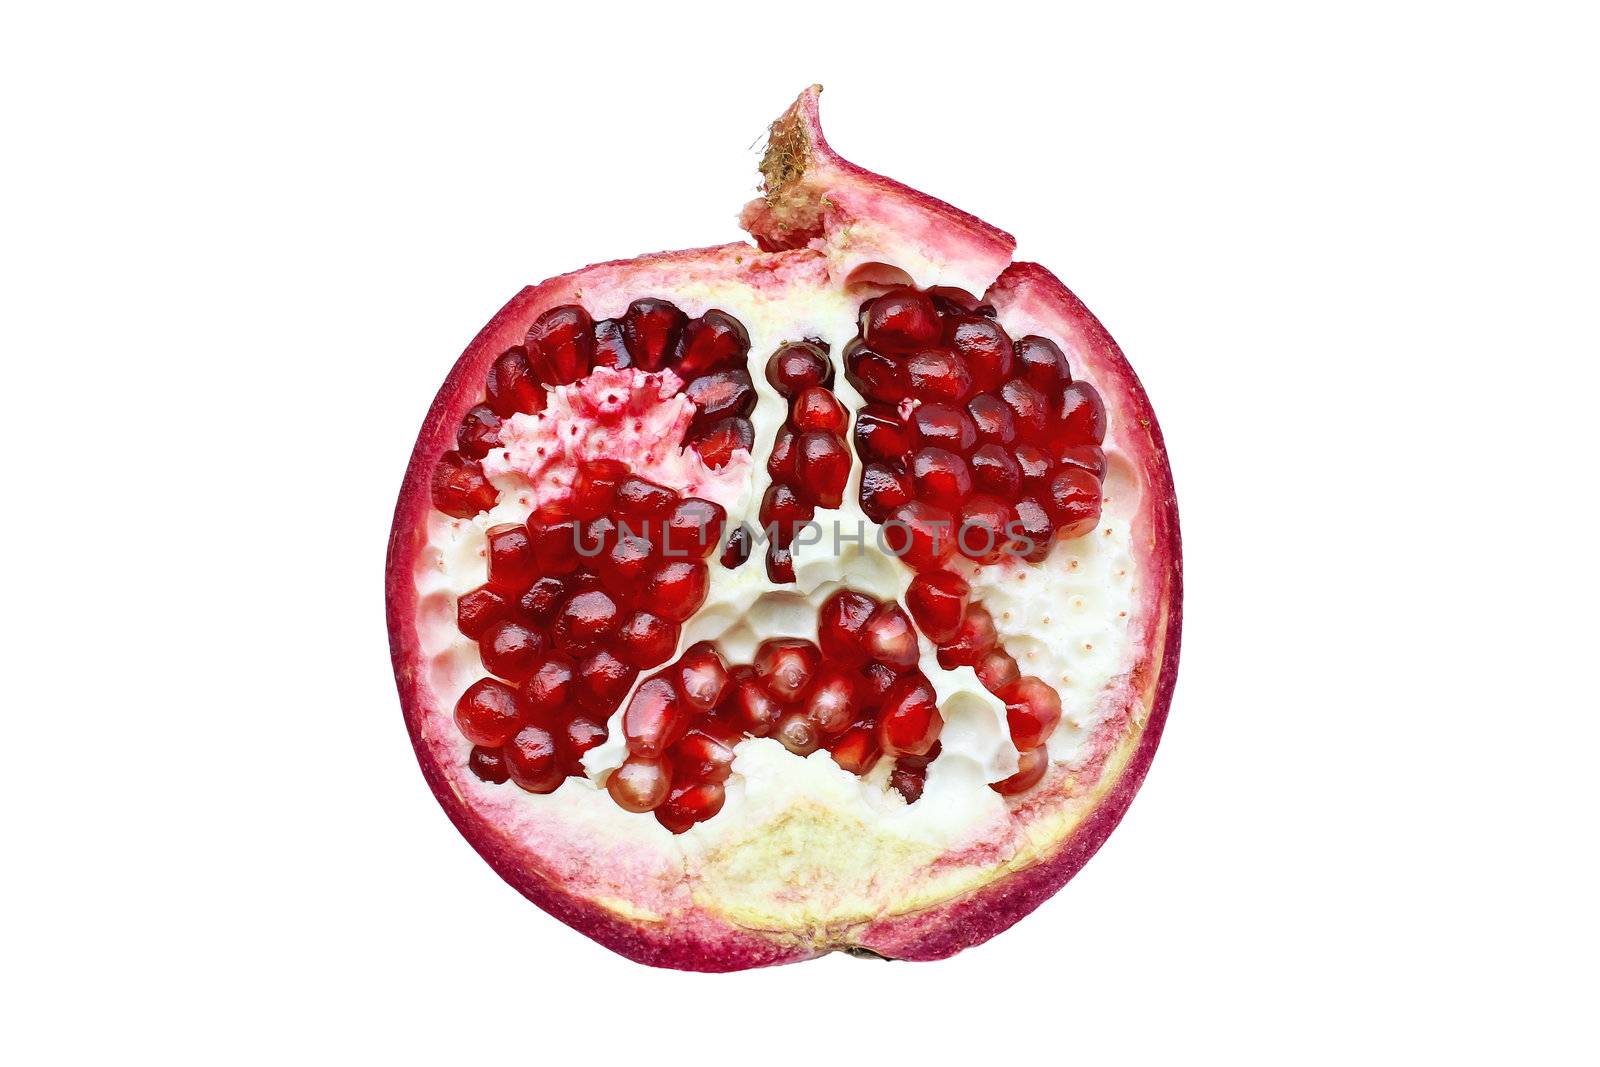 Pomegranate isolated on white background by NickNick